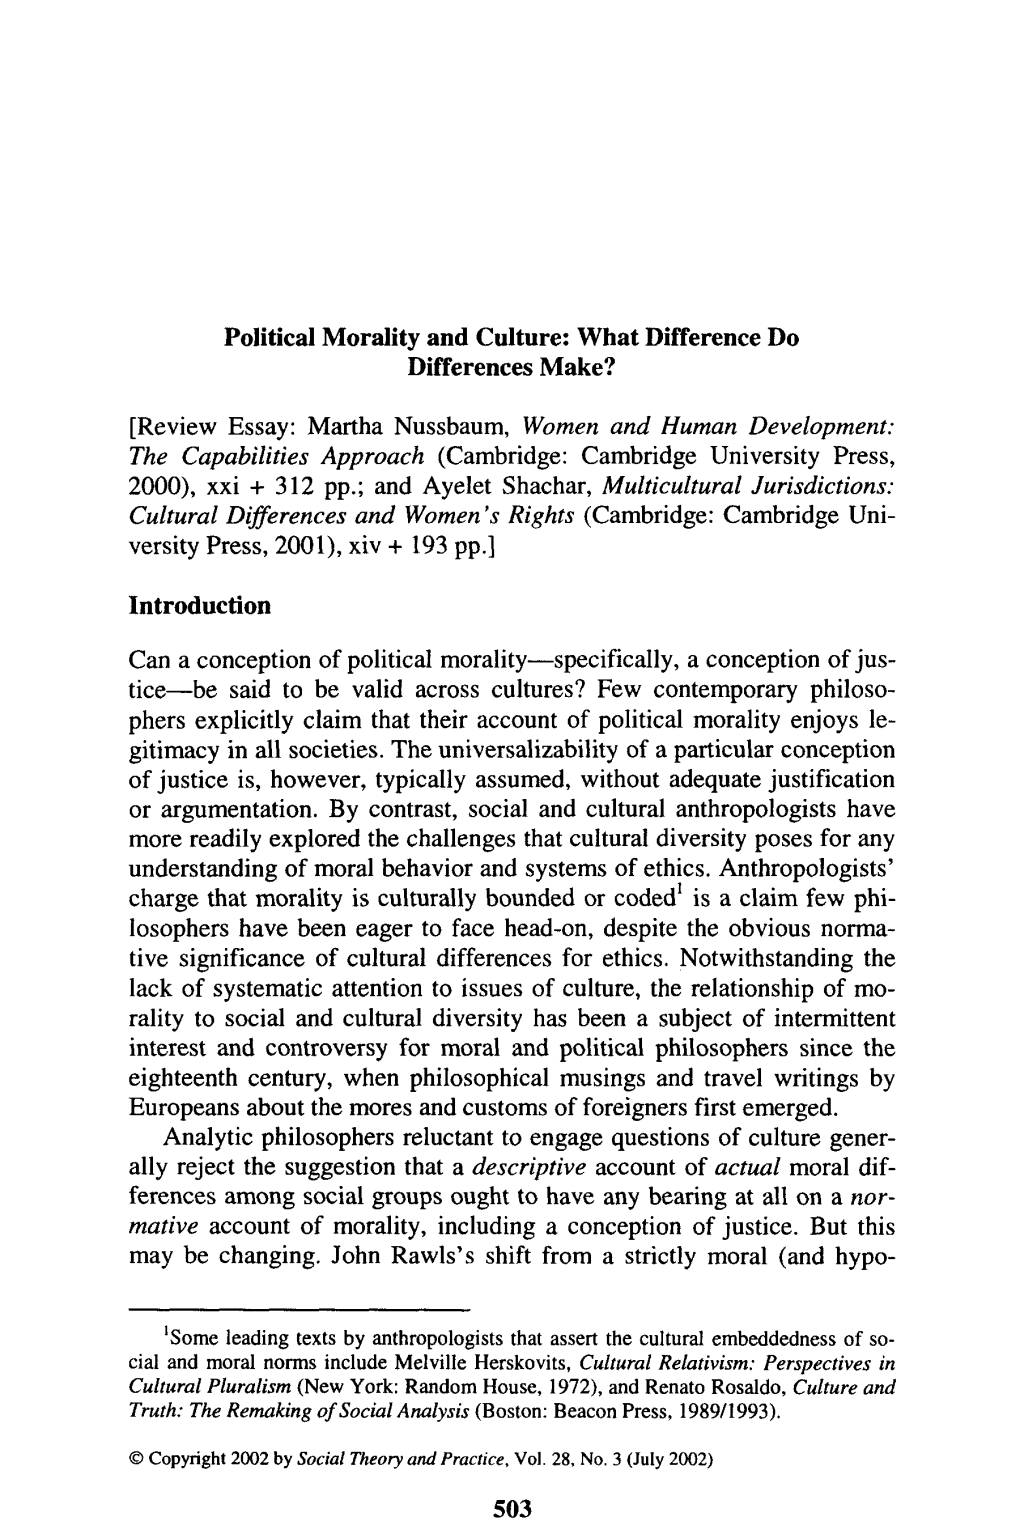 Political Morality and Culture: What Difference Do Differences Make?